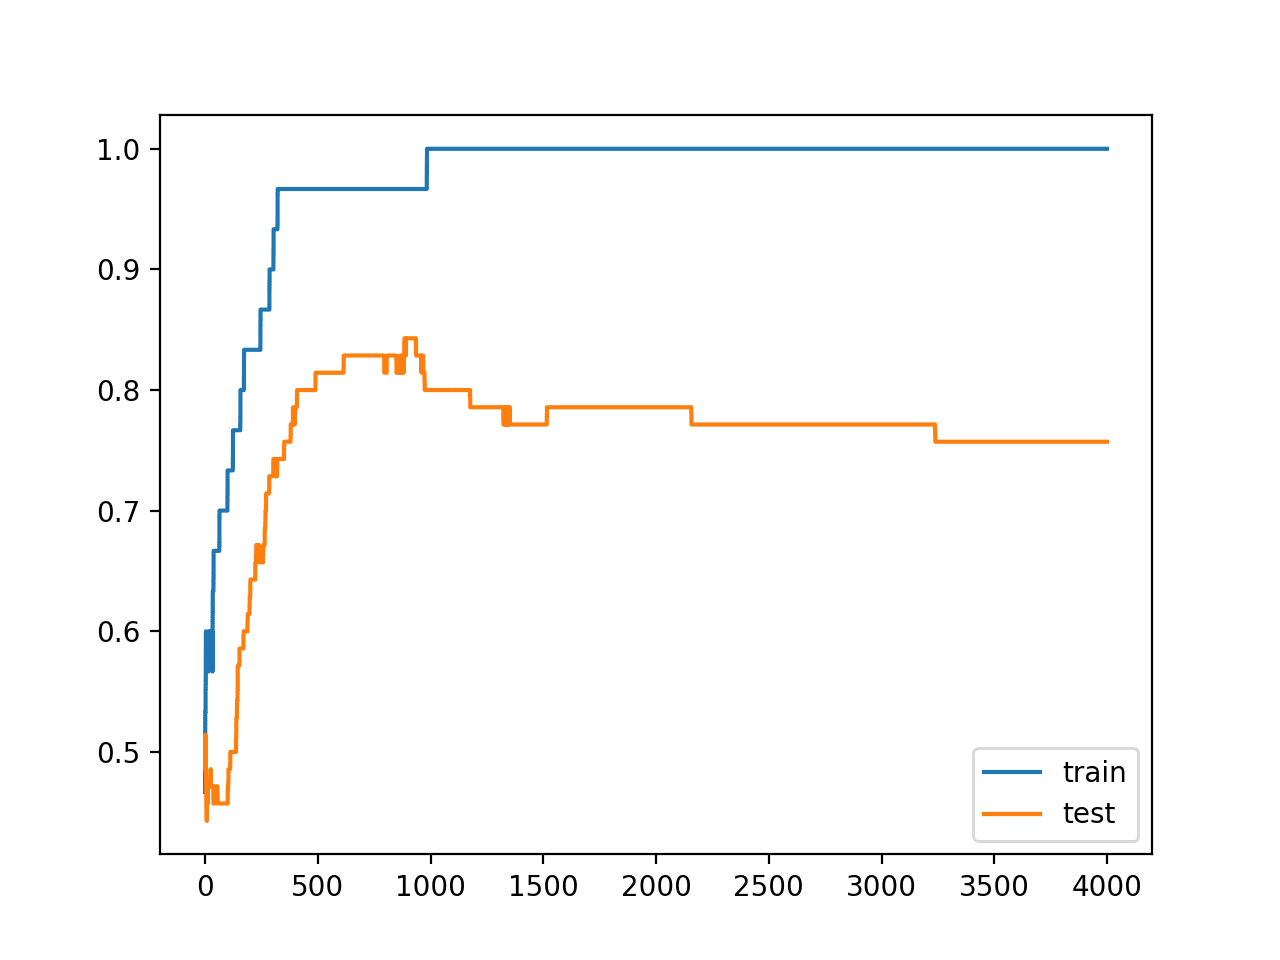 Line Plots of Accuracy on Train and Test Datasets While Training Showing an Overfit